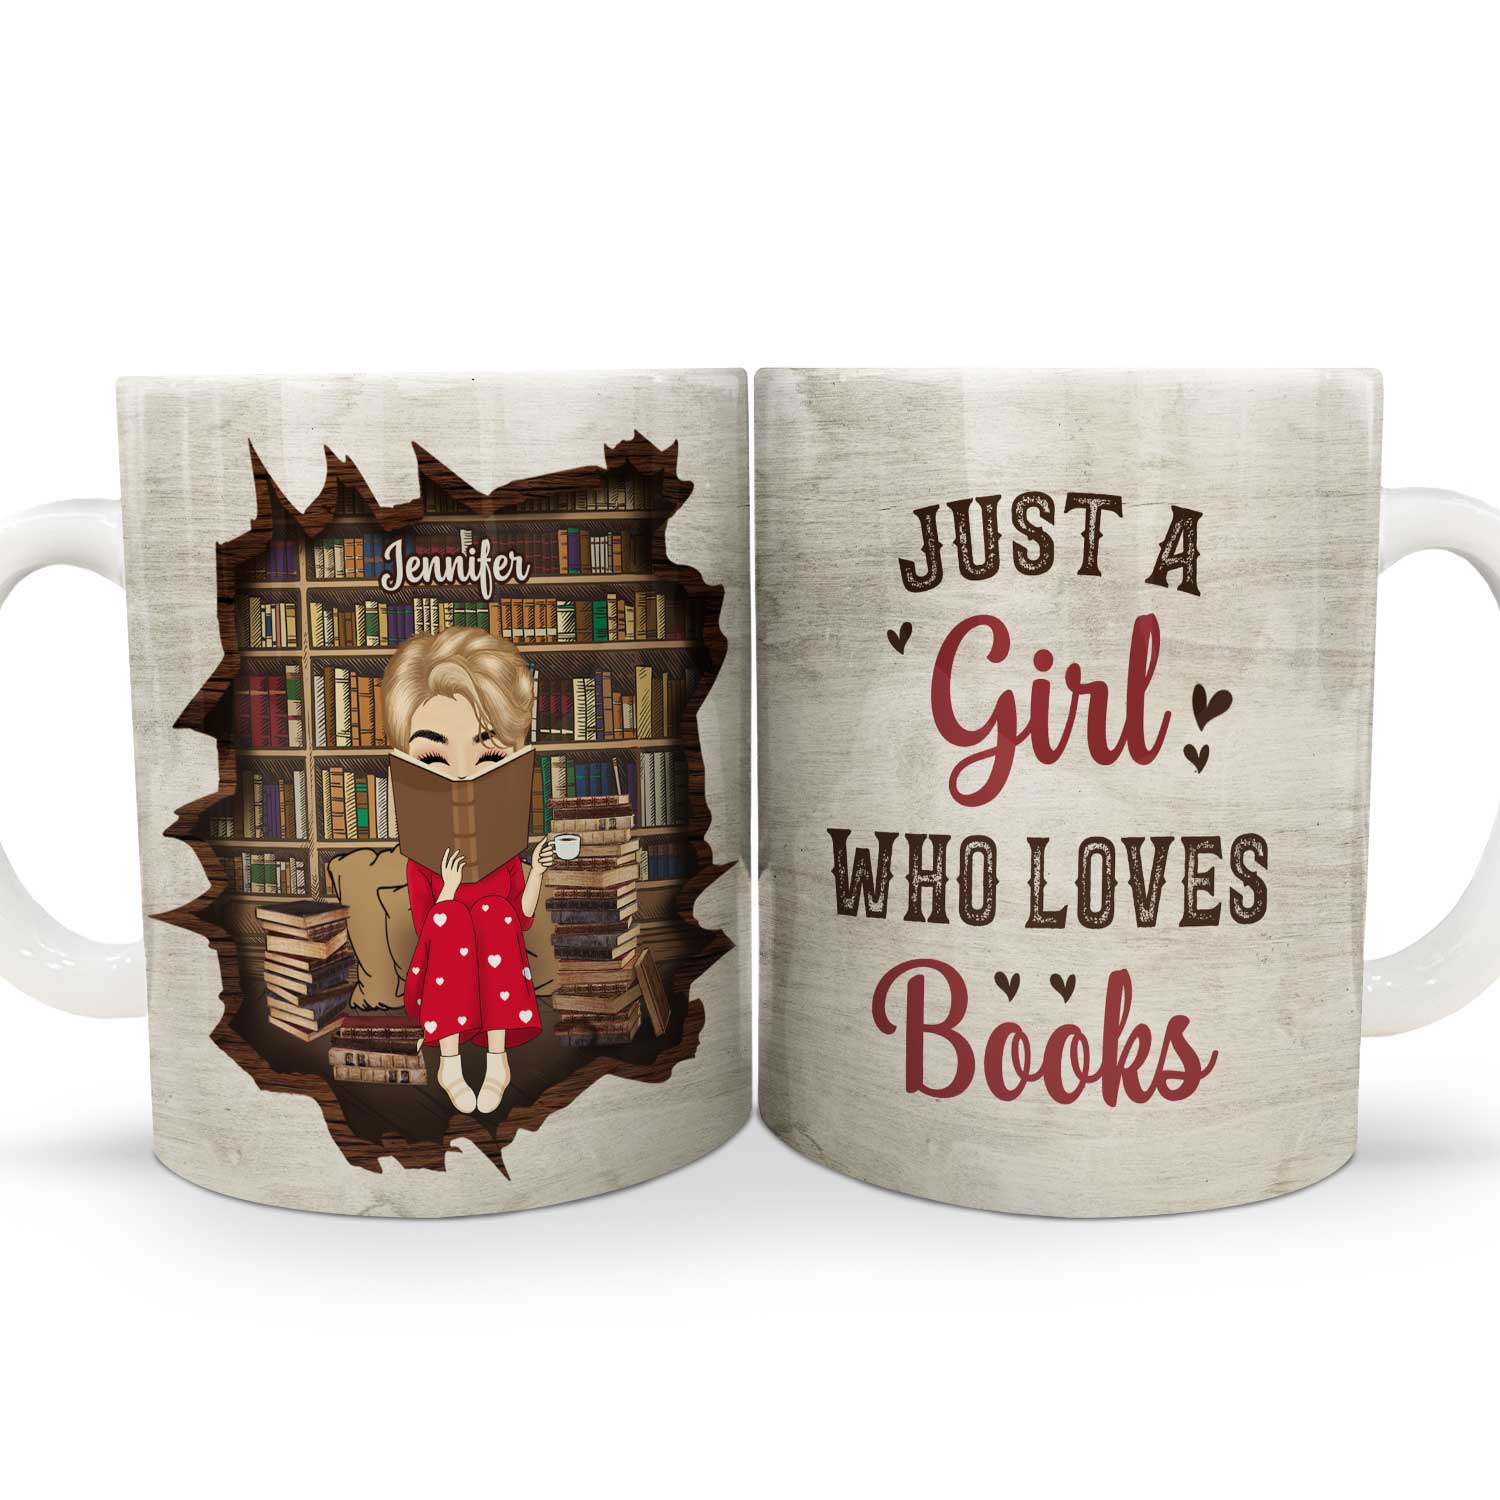 Just A Girl Who Loves Books - Gift For Book Lovers, Bookworms, Readers - Personalized White Edge-to-Edge Mug